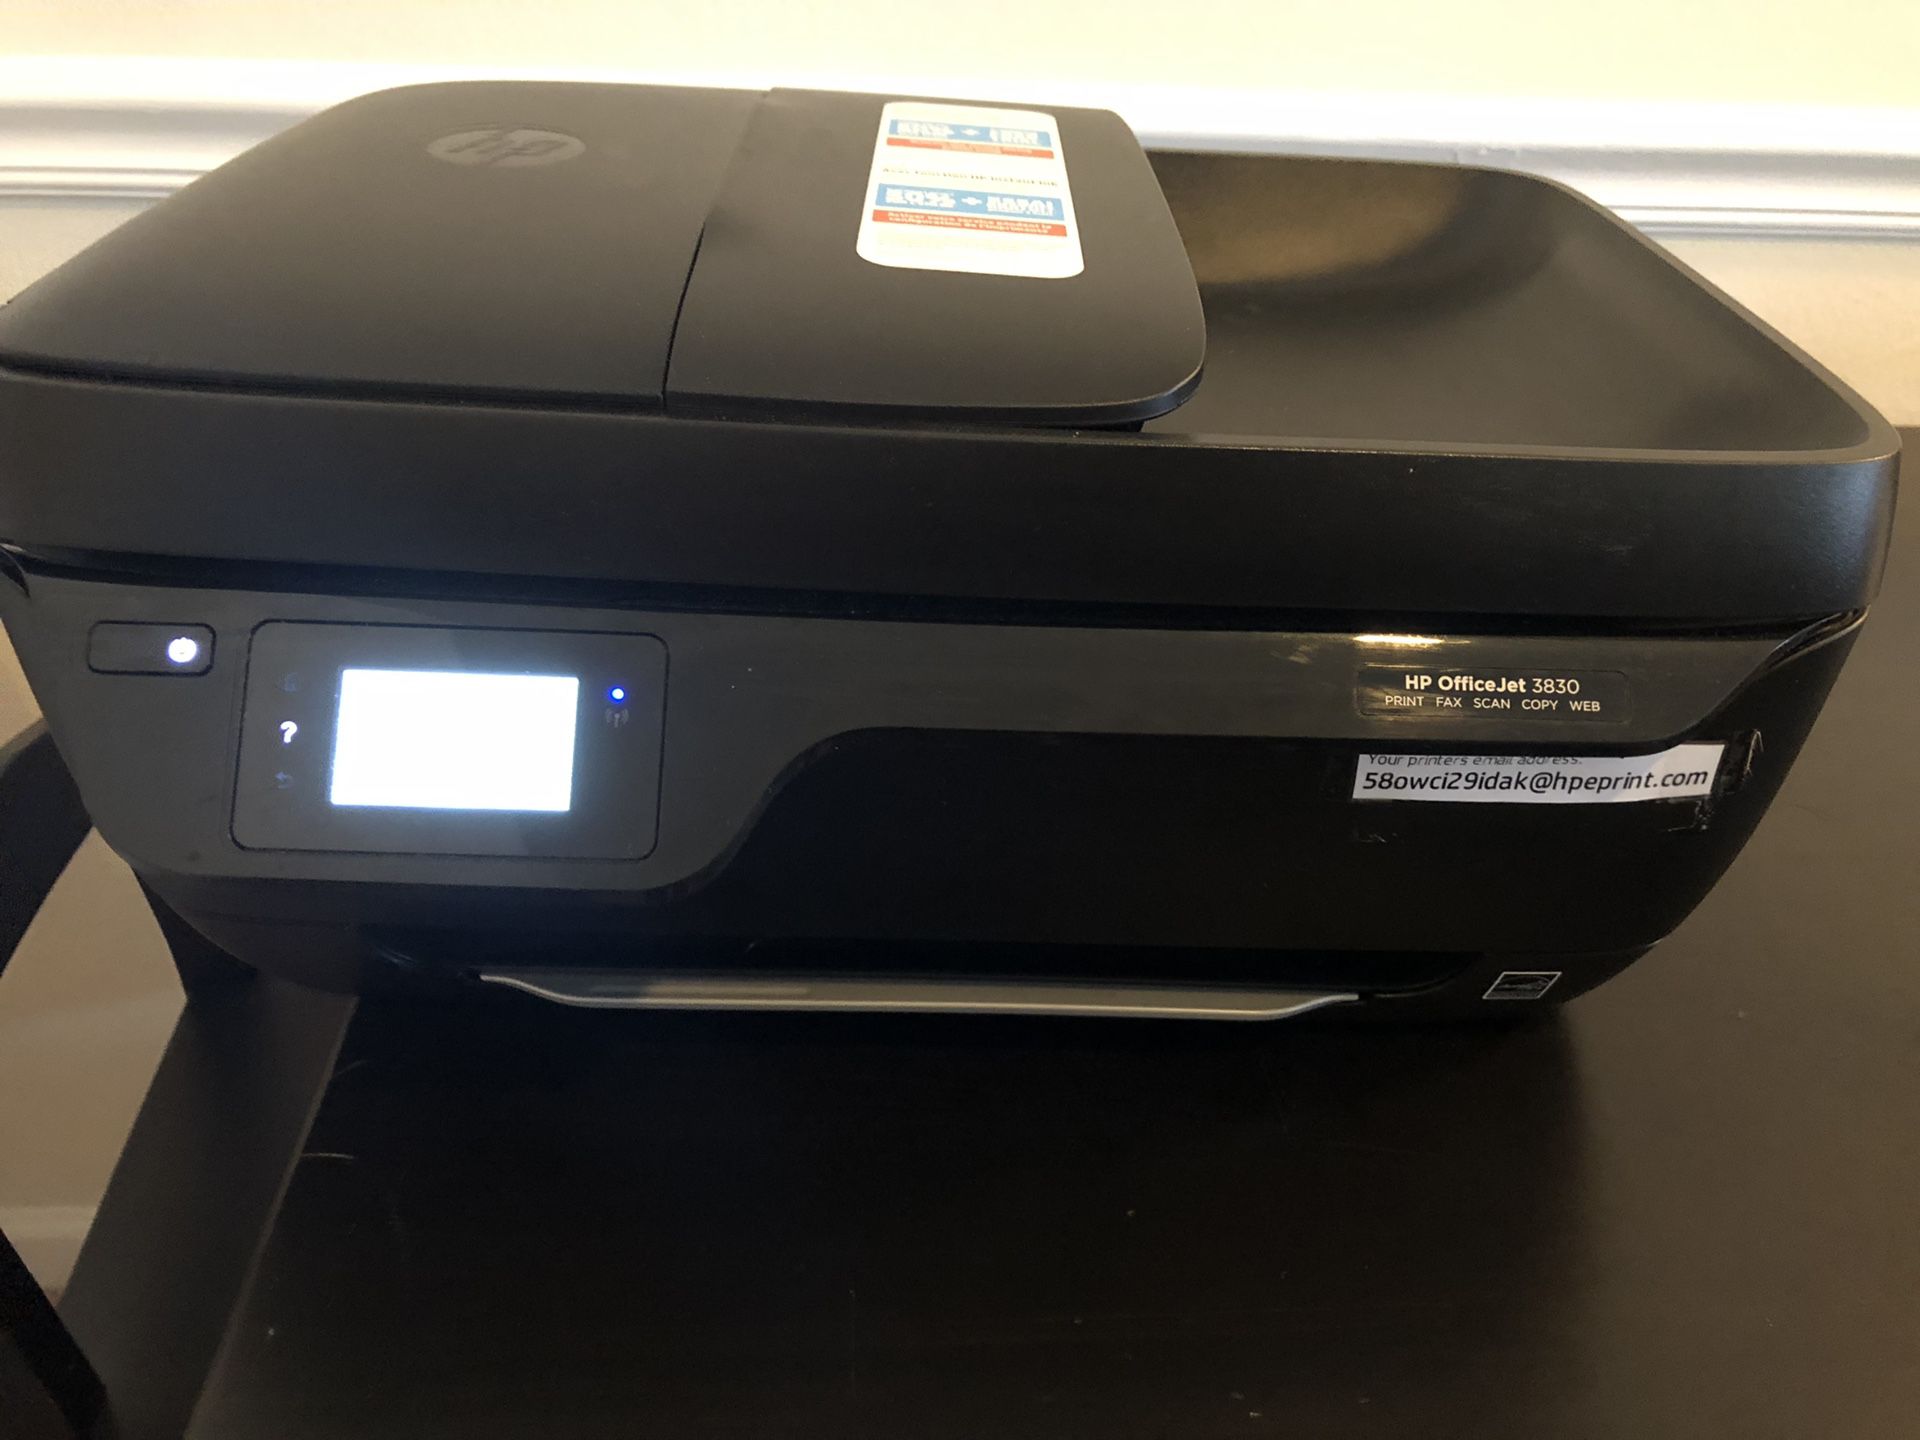 Hp office Jet 3830 all in one wireless printer